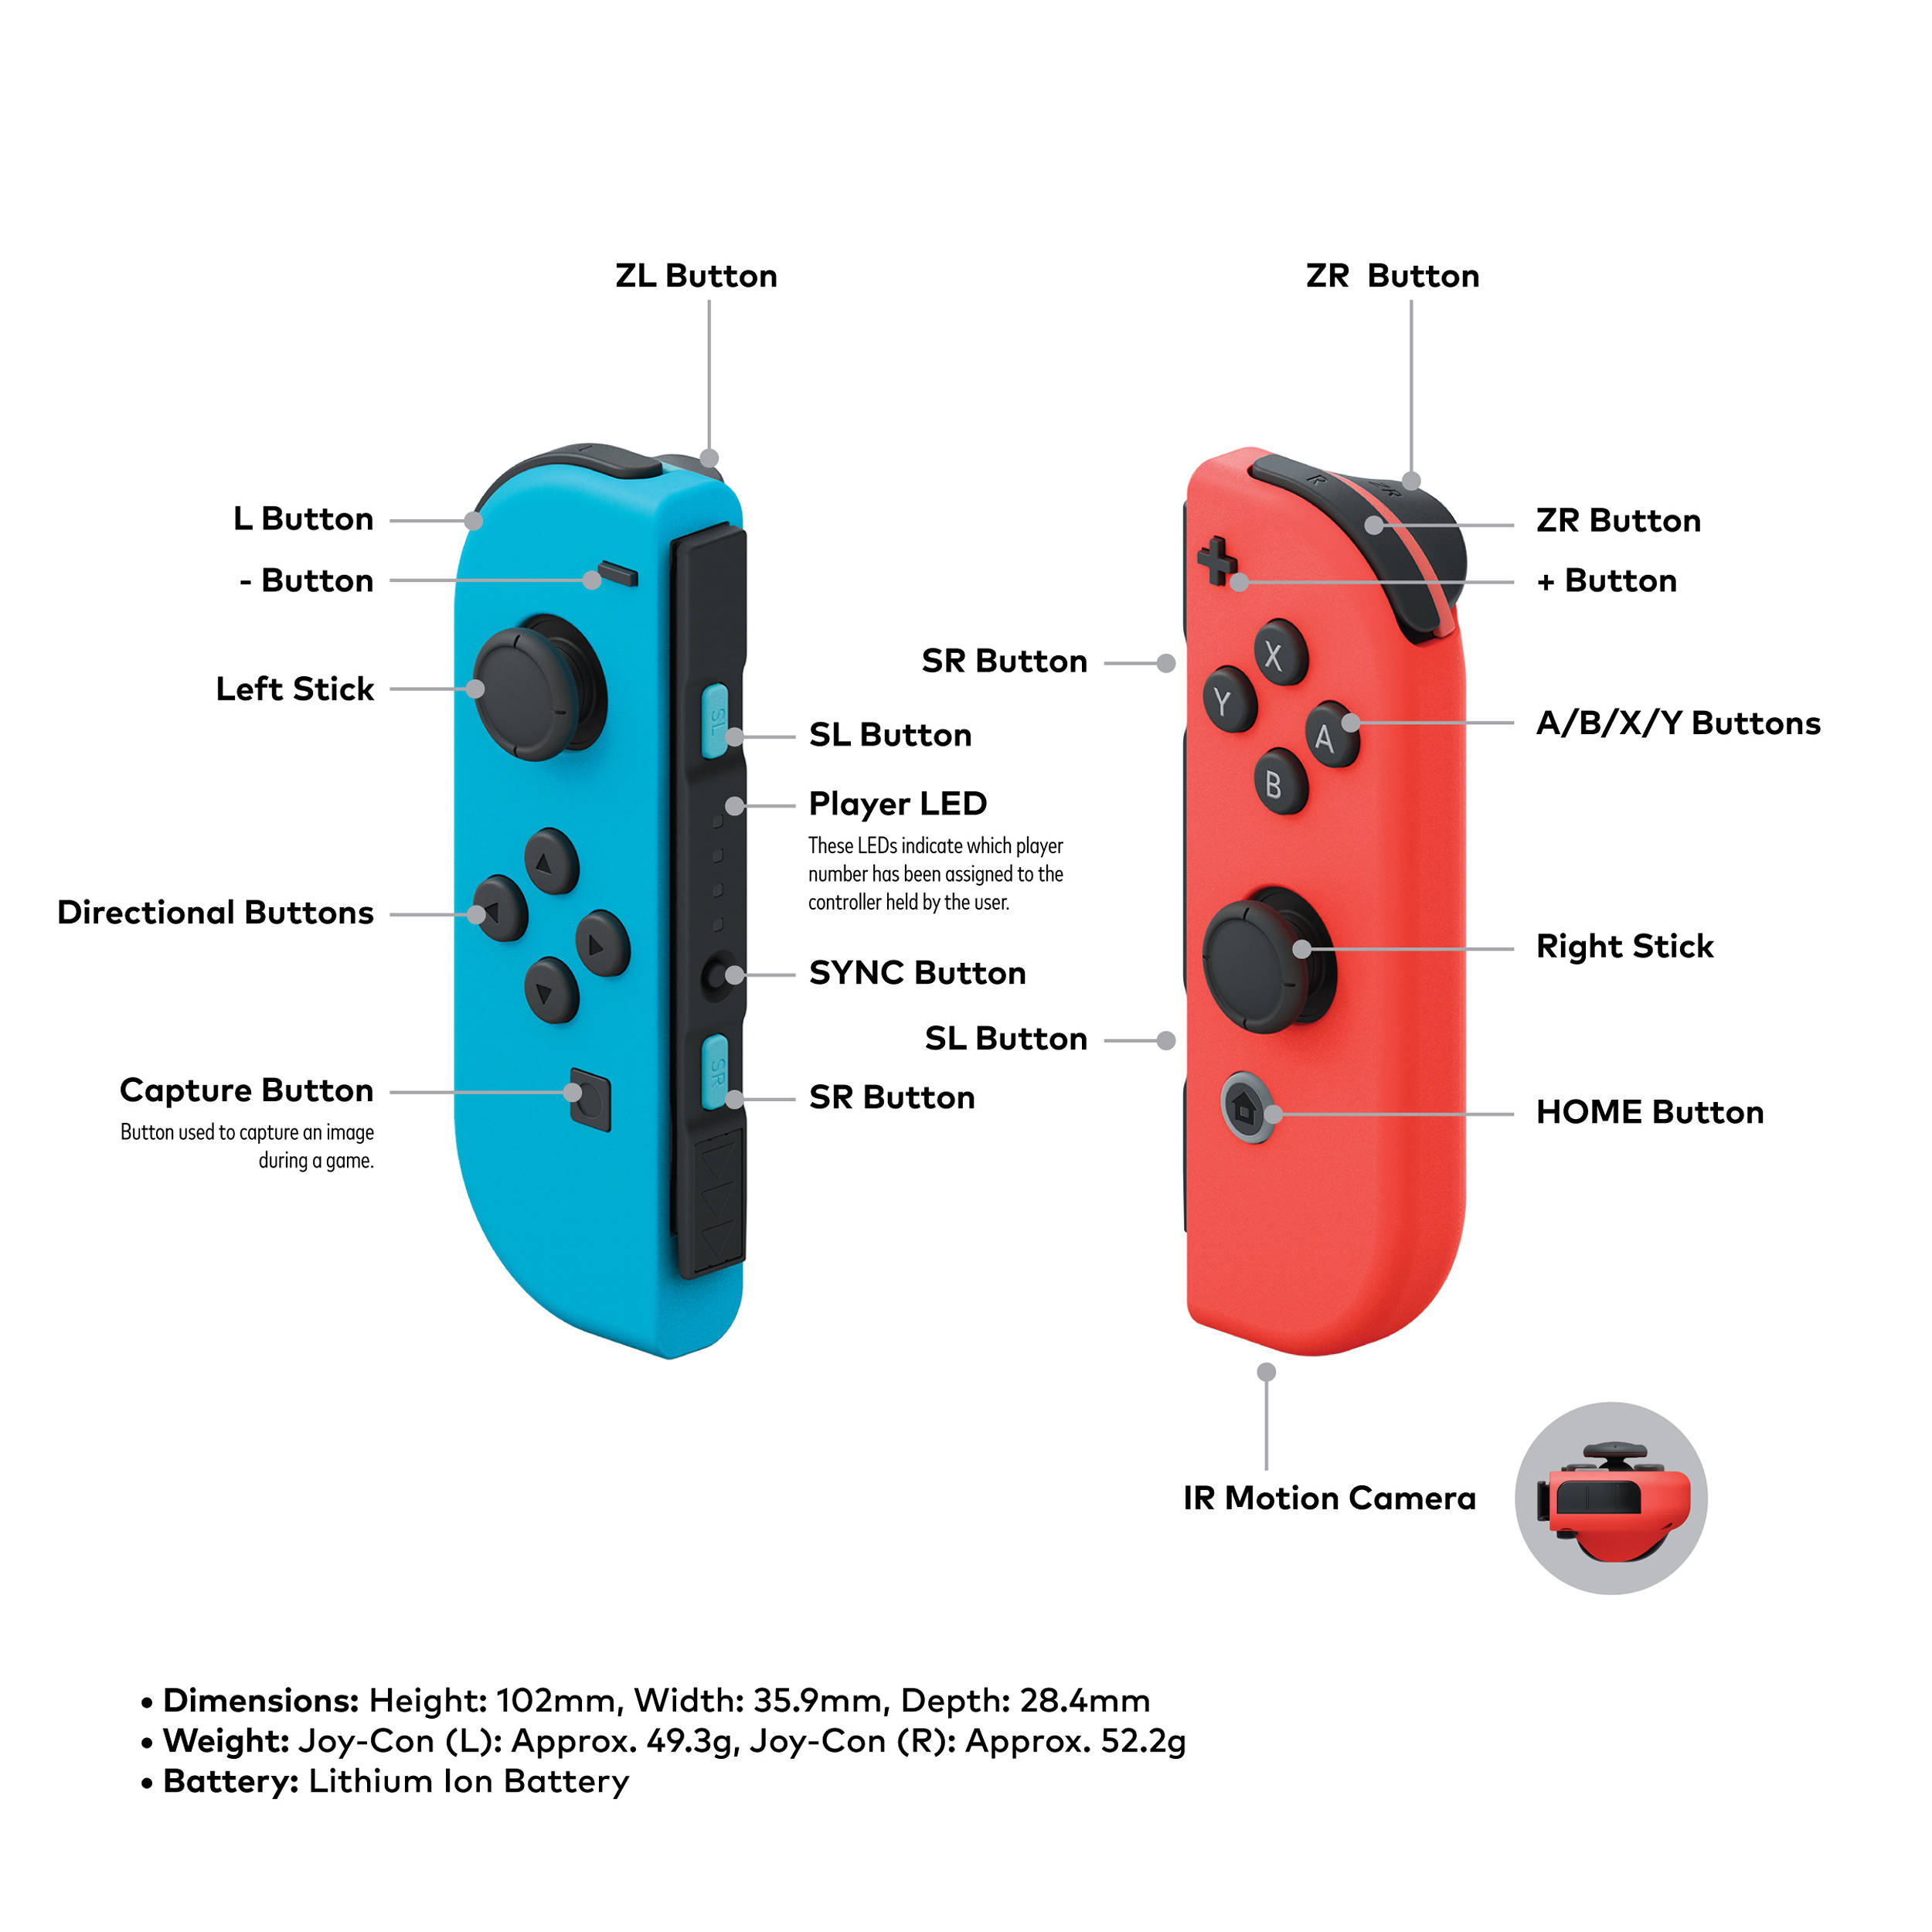 nintendo had s kabaa usz switch with neon blue and neon red joy con